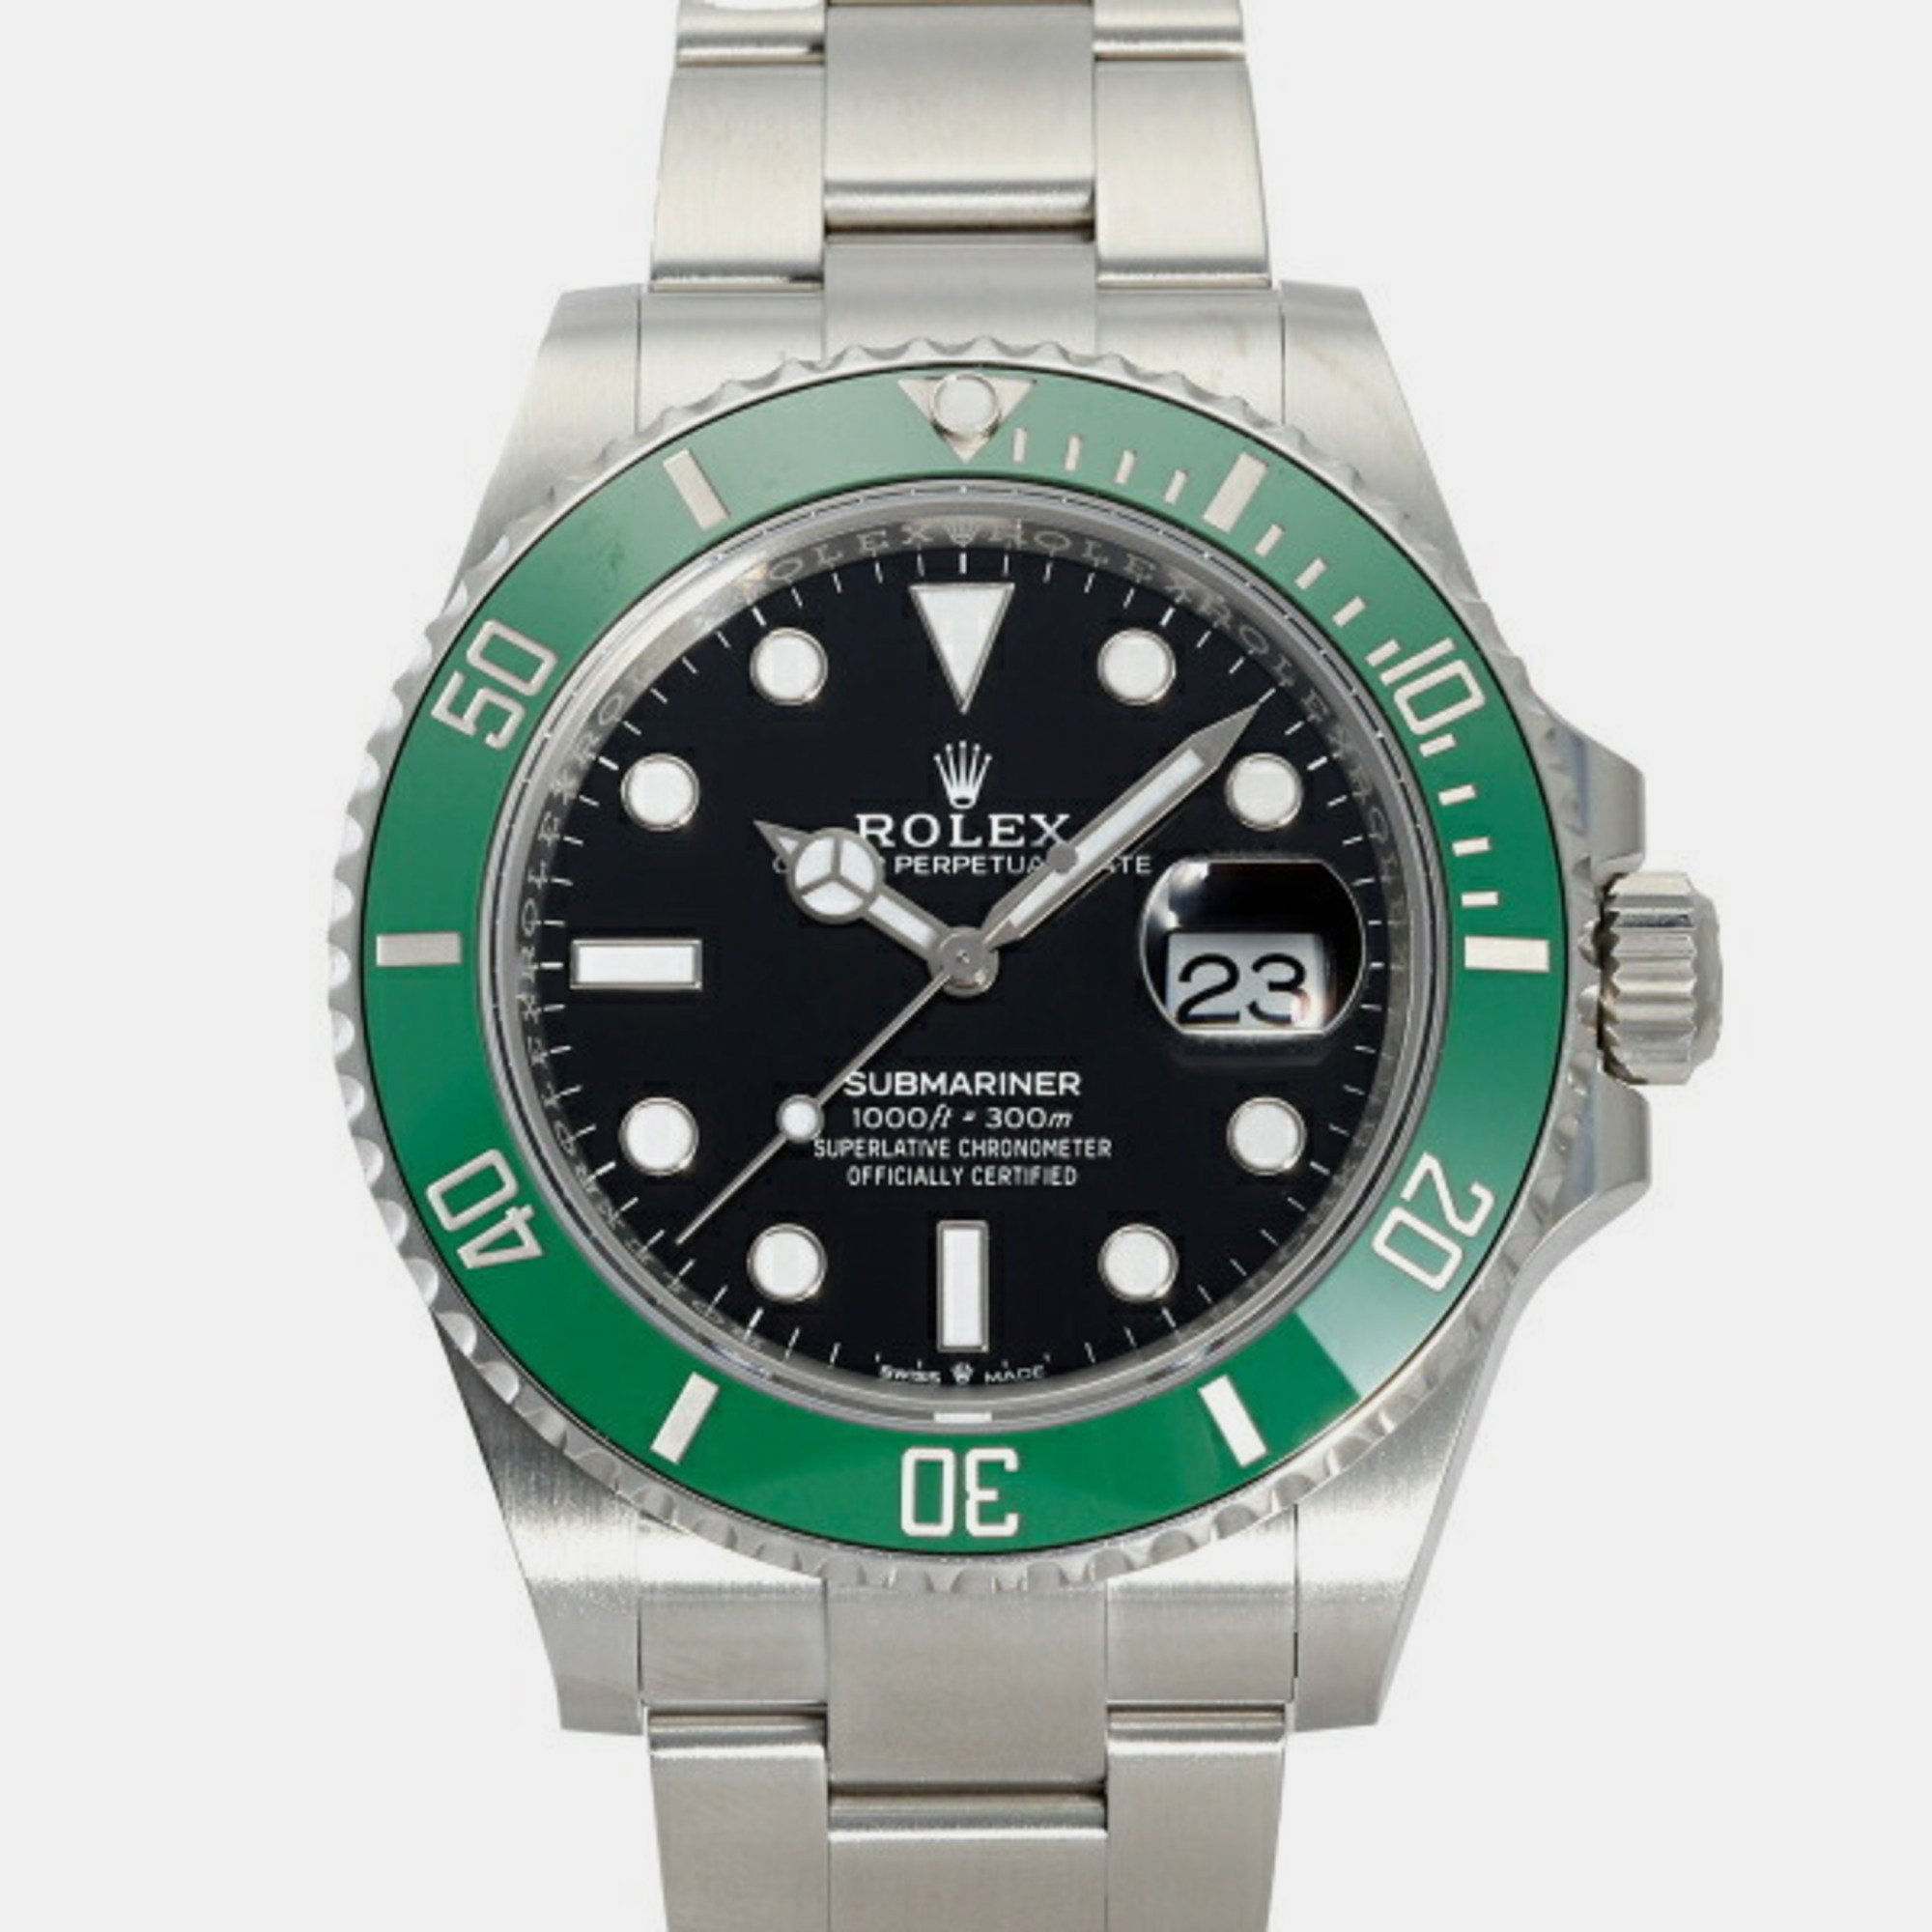 Pre-owned Rolex Black Stainless Steel And Ceramic Submariner 126610lv Men's Wristwatch 42mm